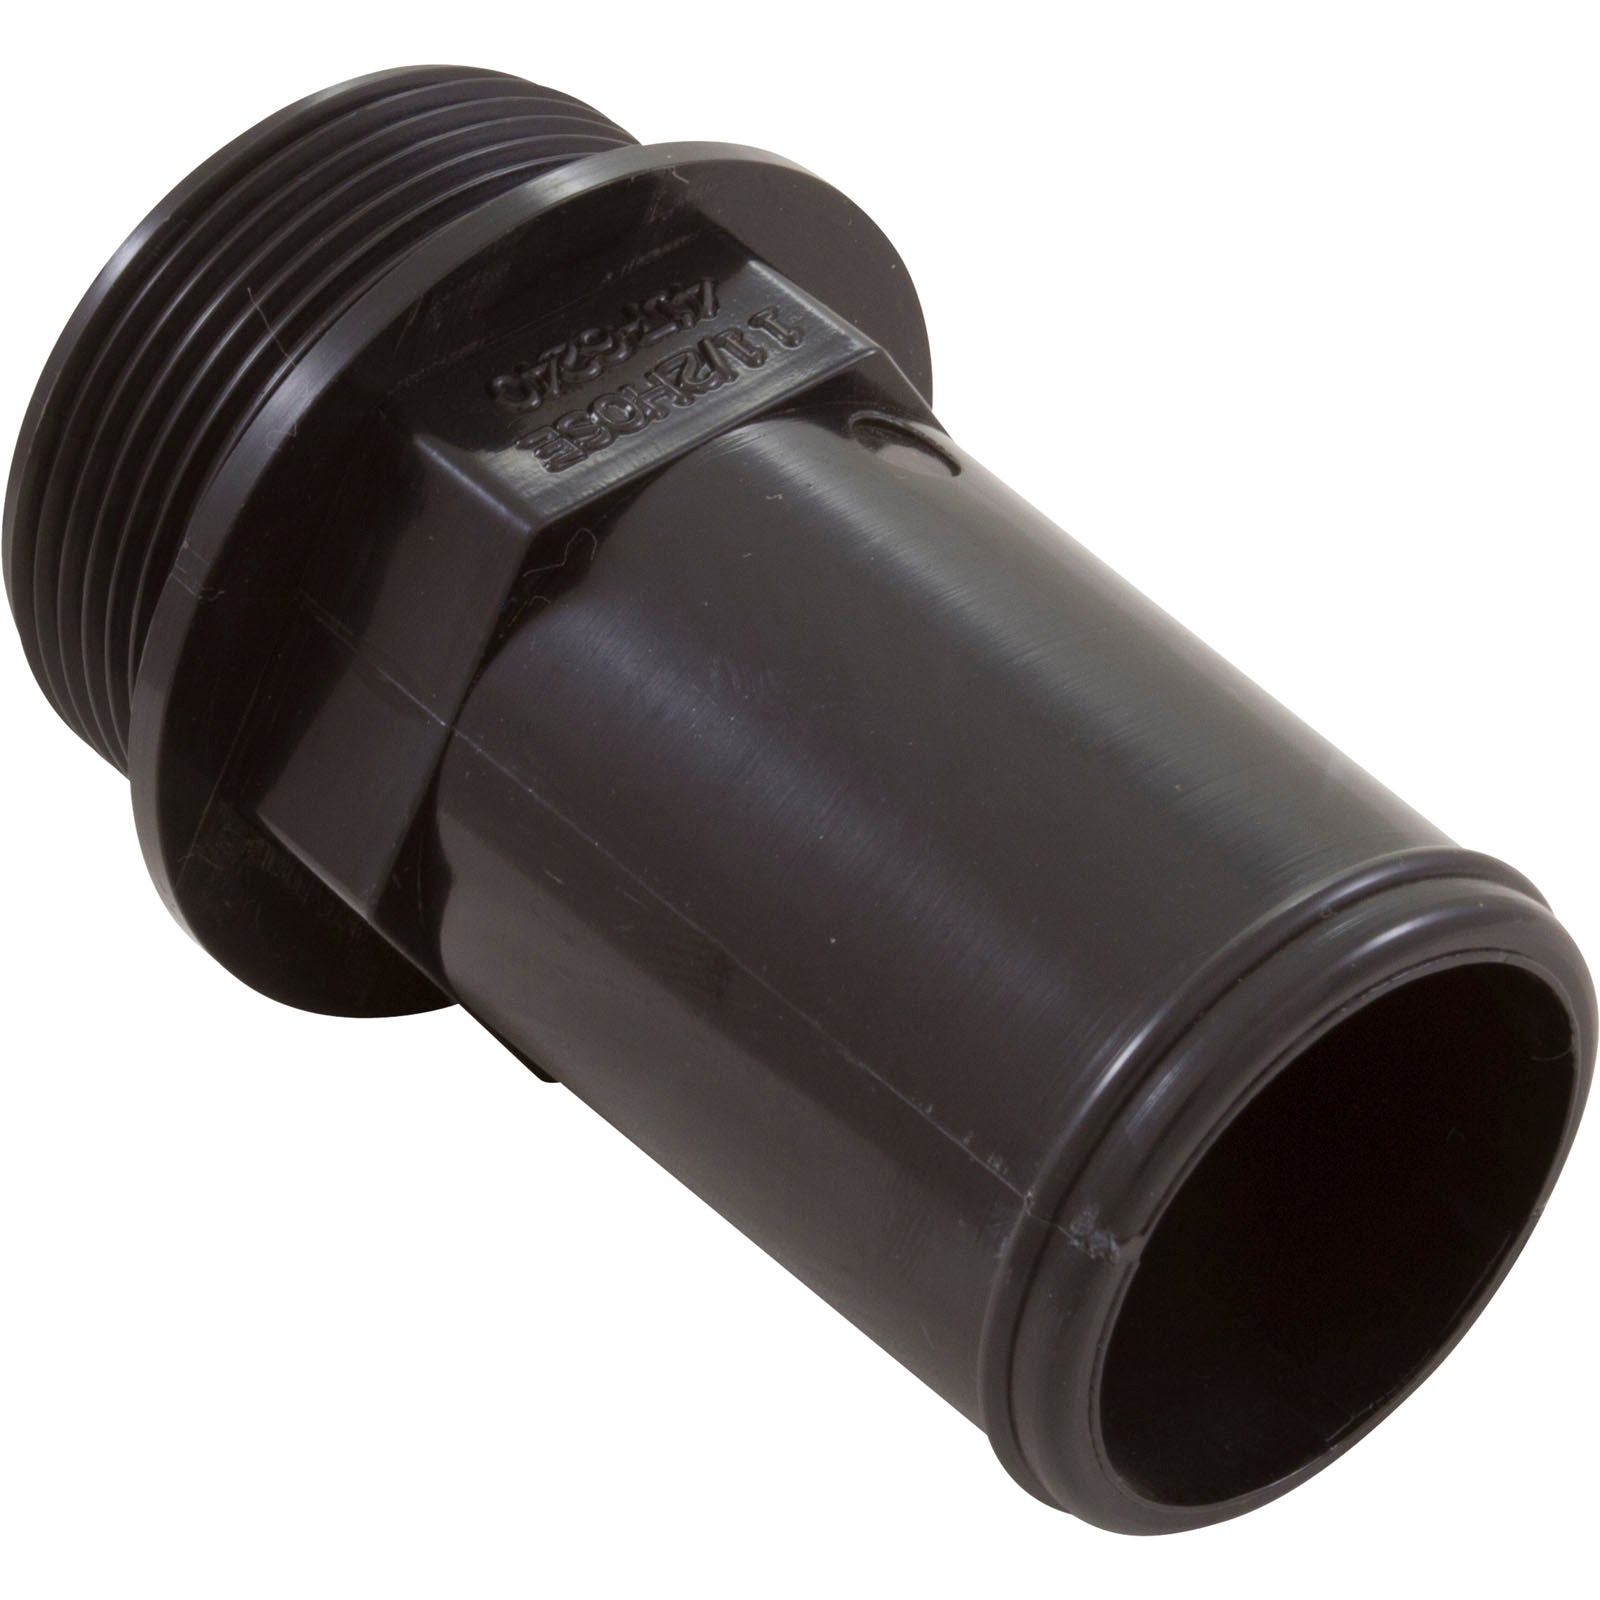 Adapter, 1-1/2" Male Pipe Thread x 1-1/2" Barb/ 417-6241